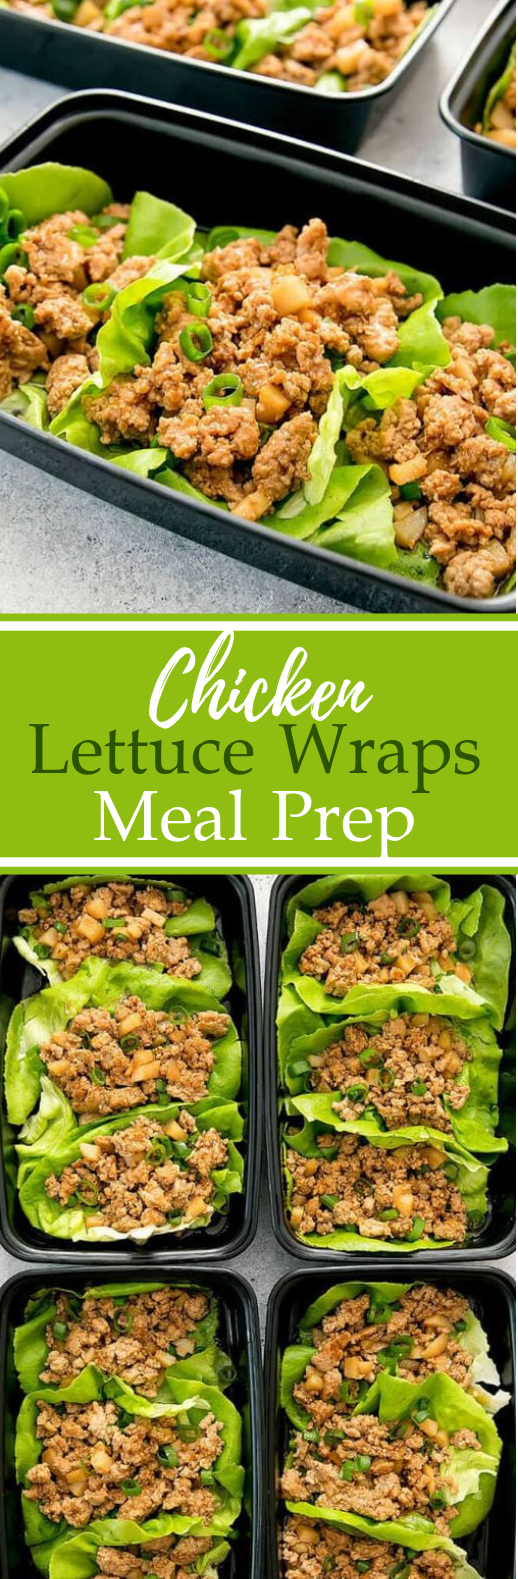 Chicken Lettuce Wraps Meal Prep #healthy #lunch